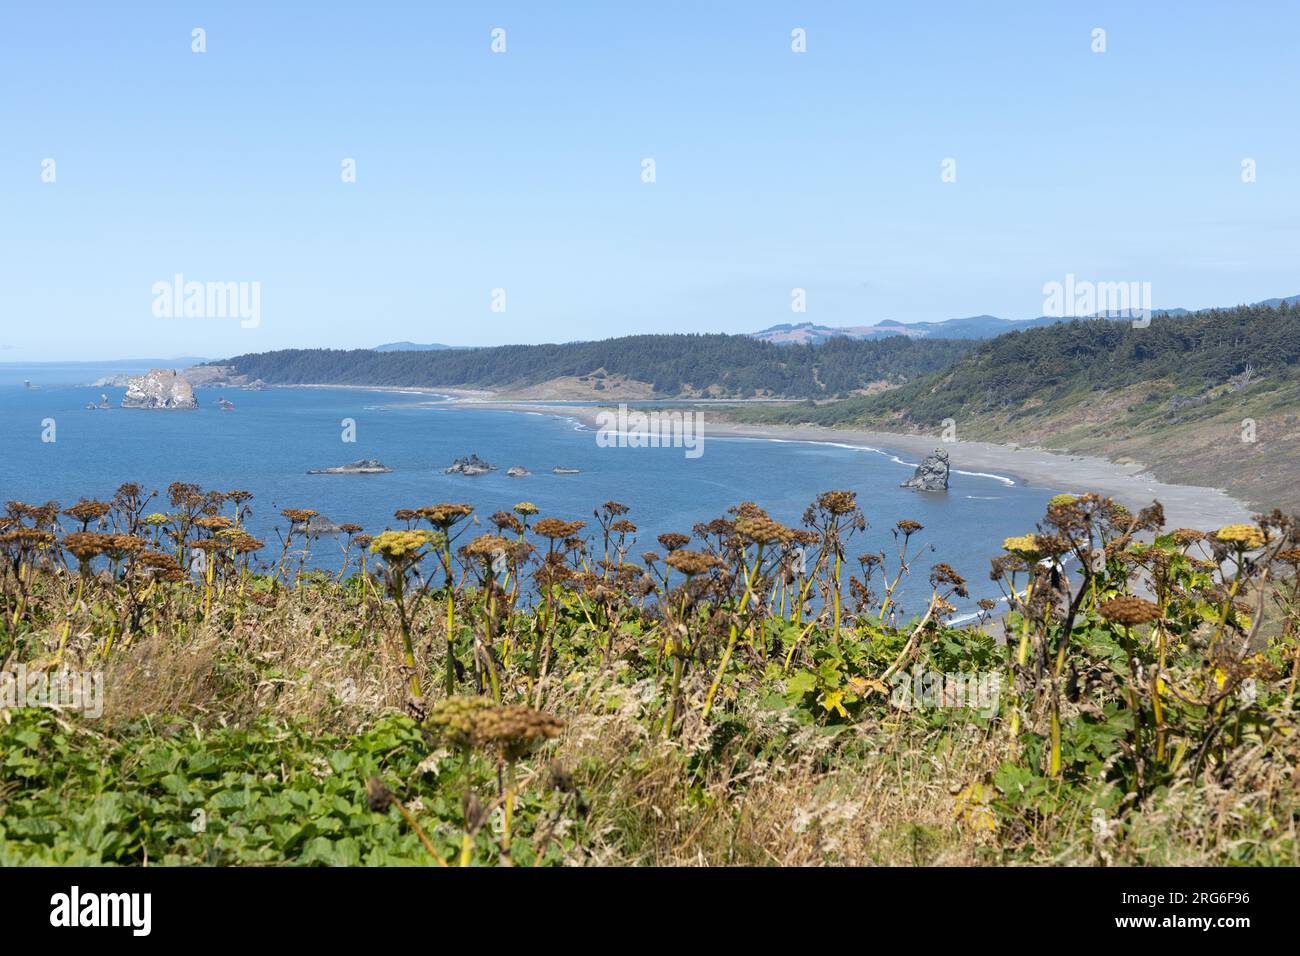 View out over the ocean, from the tip of Cape Blanco in Port Orford, Oregon. Stock Photo